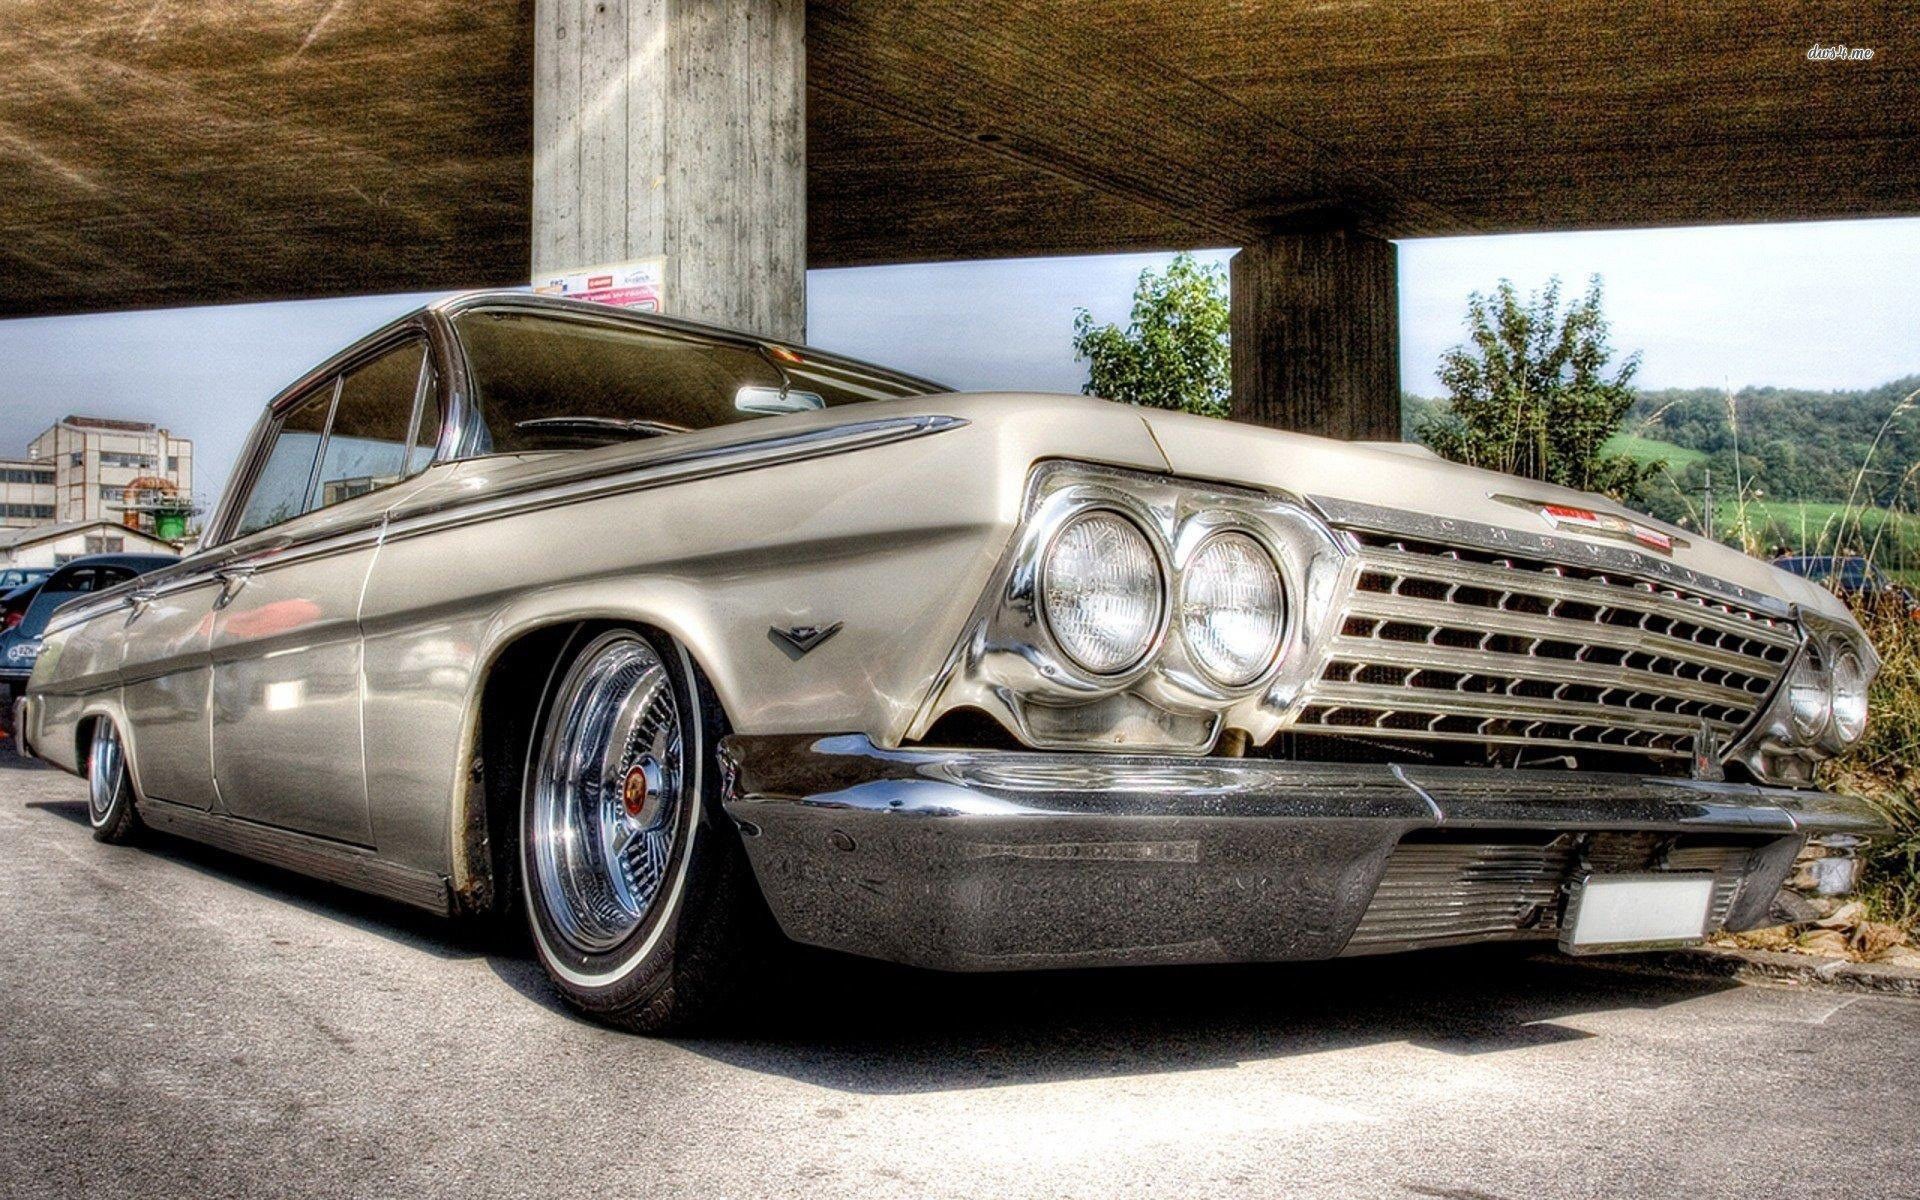 1920x1200 1920 1200 Source Http Wallpapercave Com Lowrider Cars Wallpapers